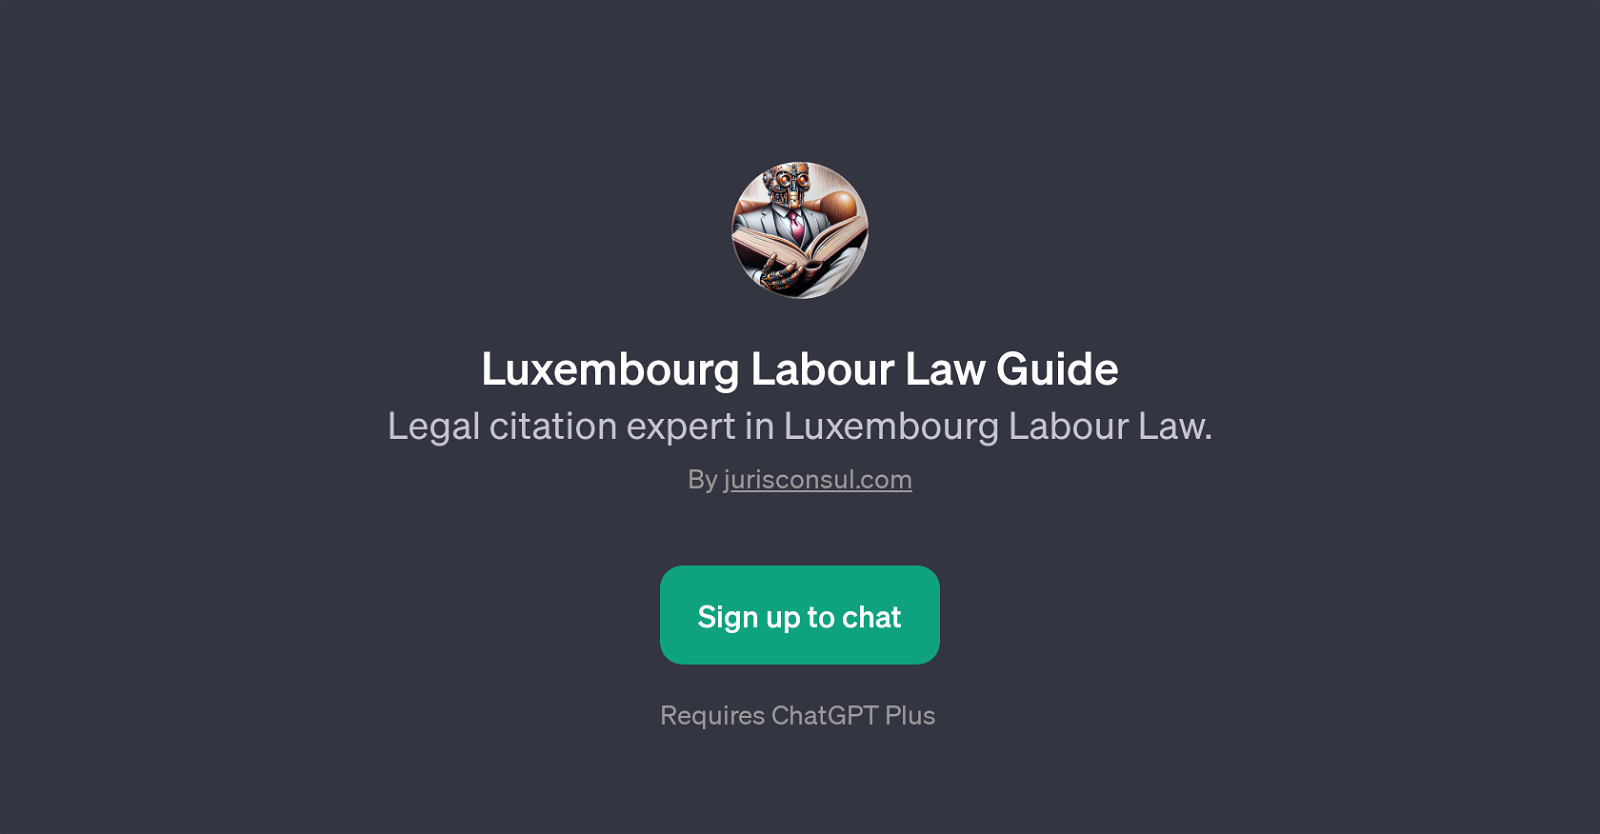 Luxembourg Labour Law Guide website